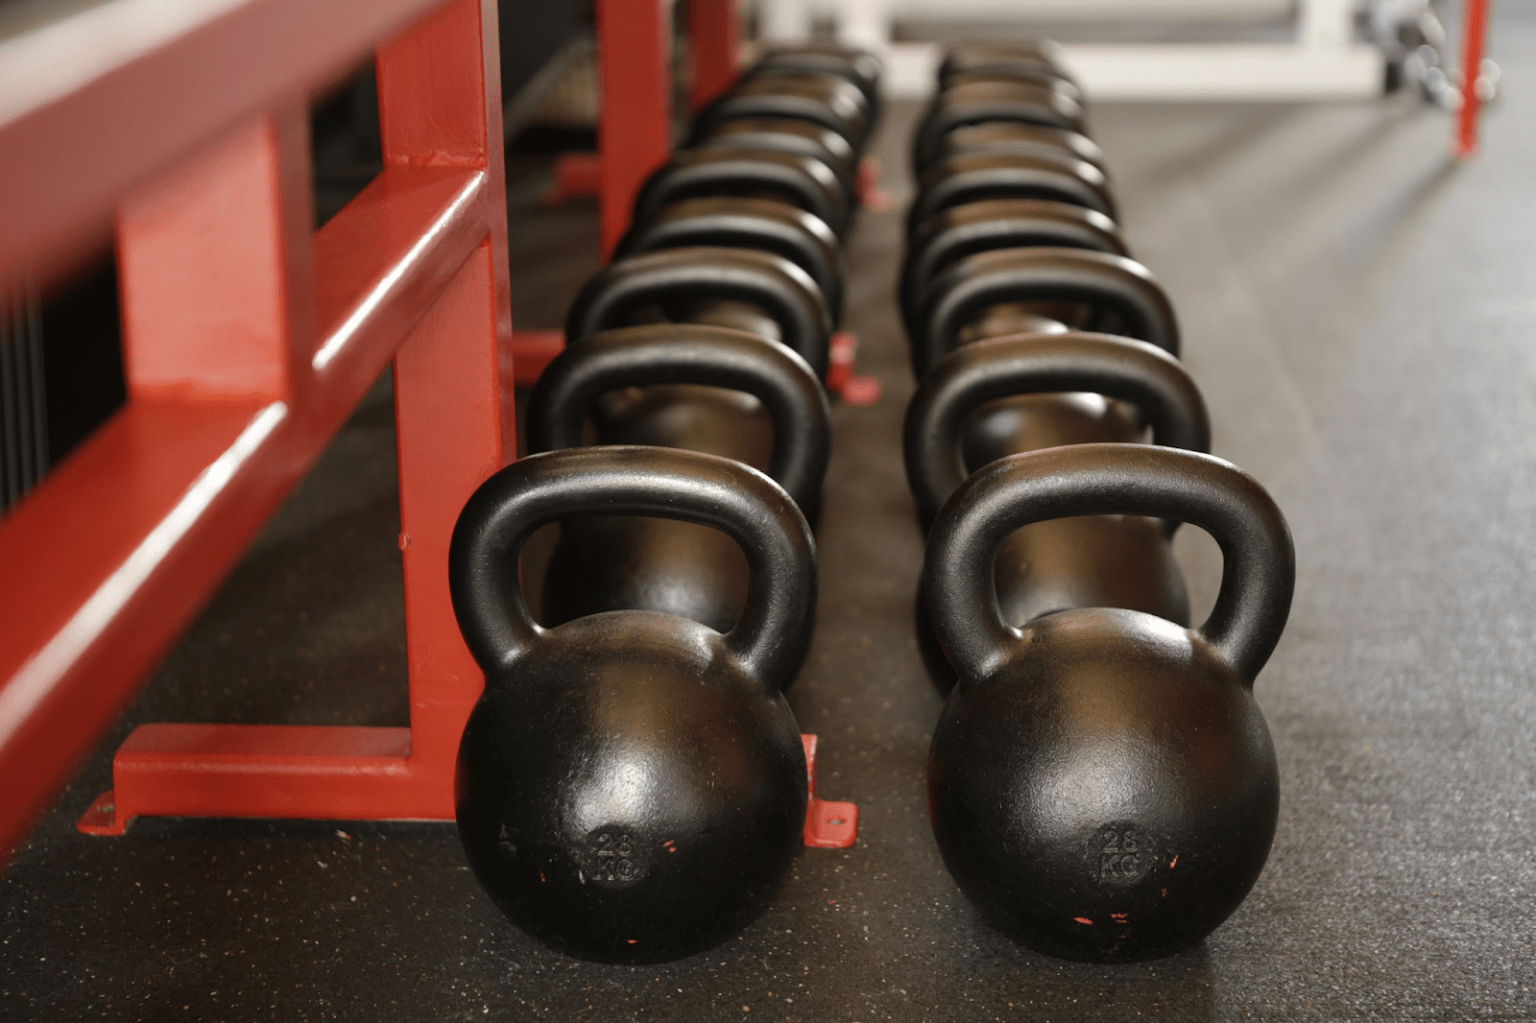 Cynergi Health & Fitness | Fitness Tips for Life - 5 Daily habits that will improve your life | Kettle Bells